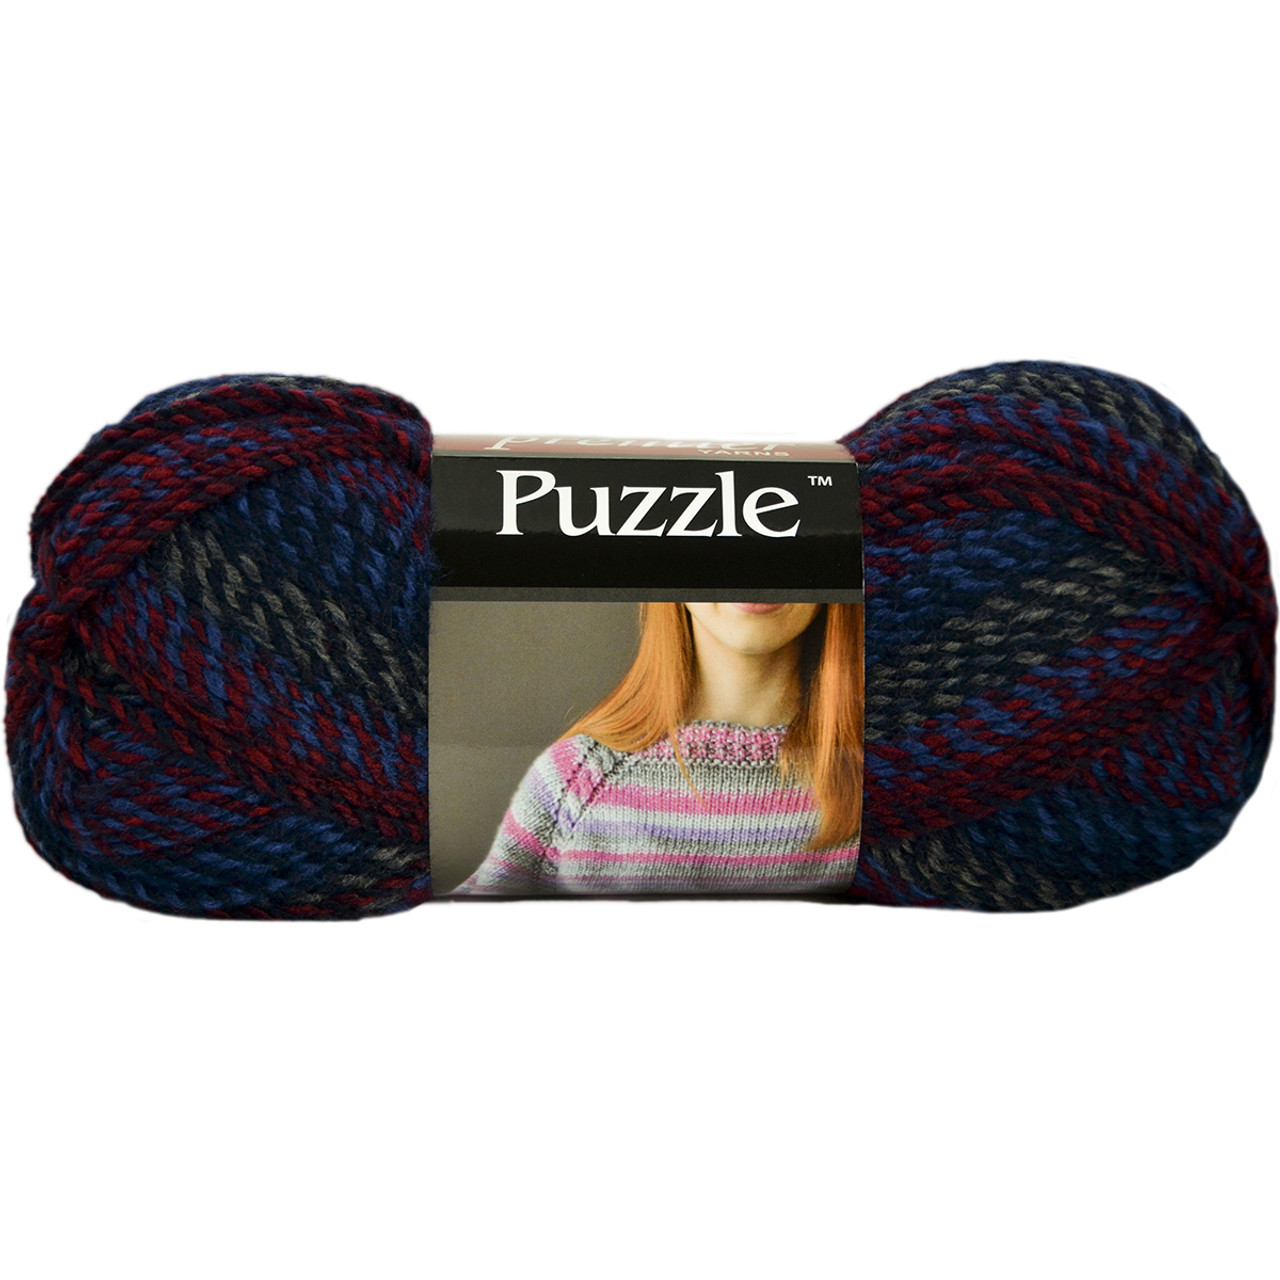 Premier Puzzle Yarn-Candy